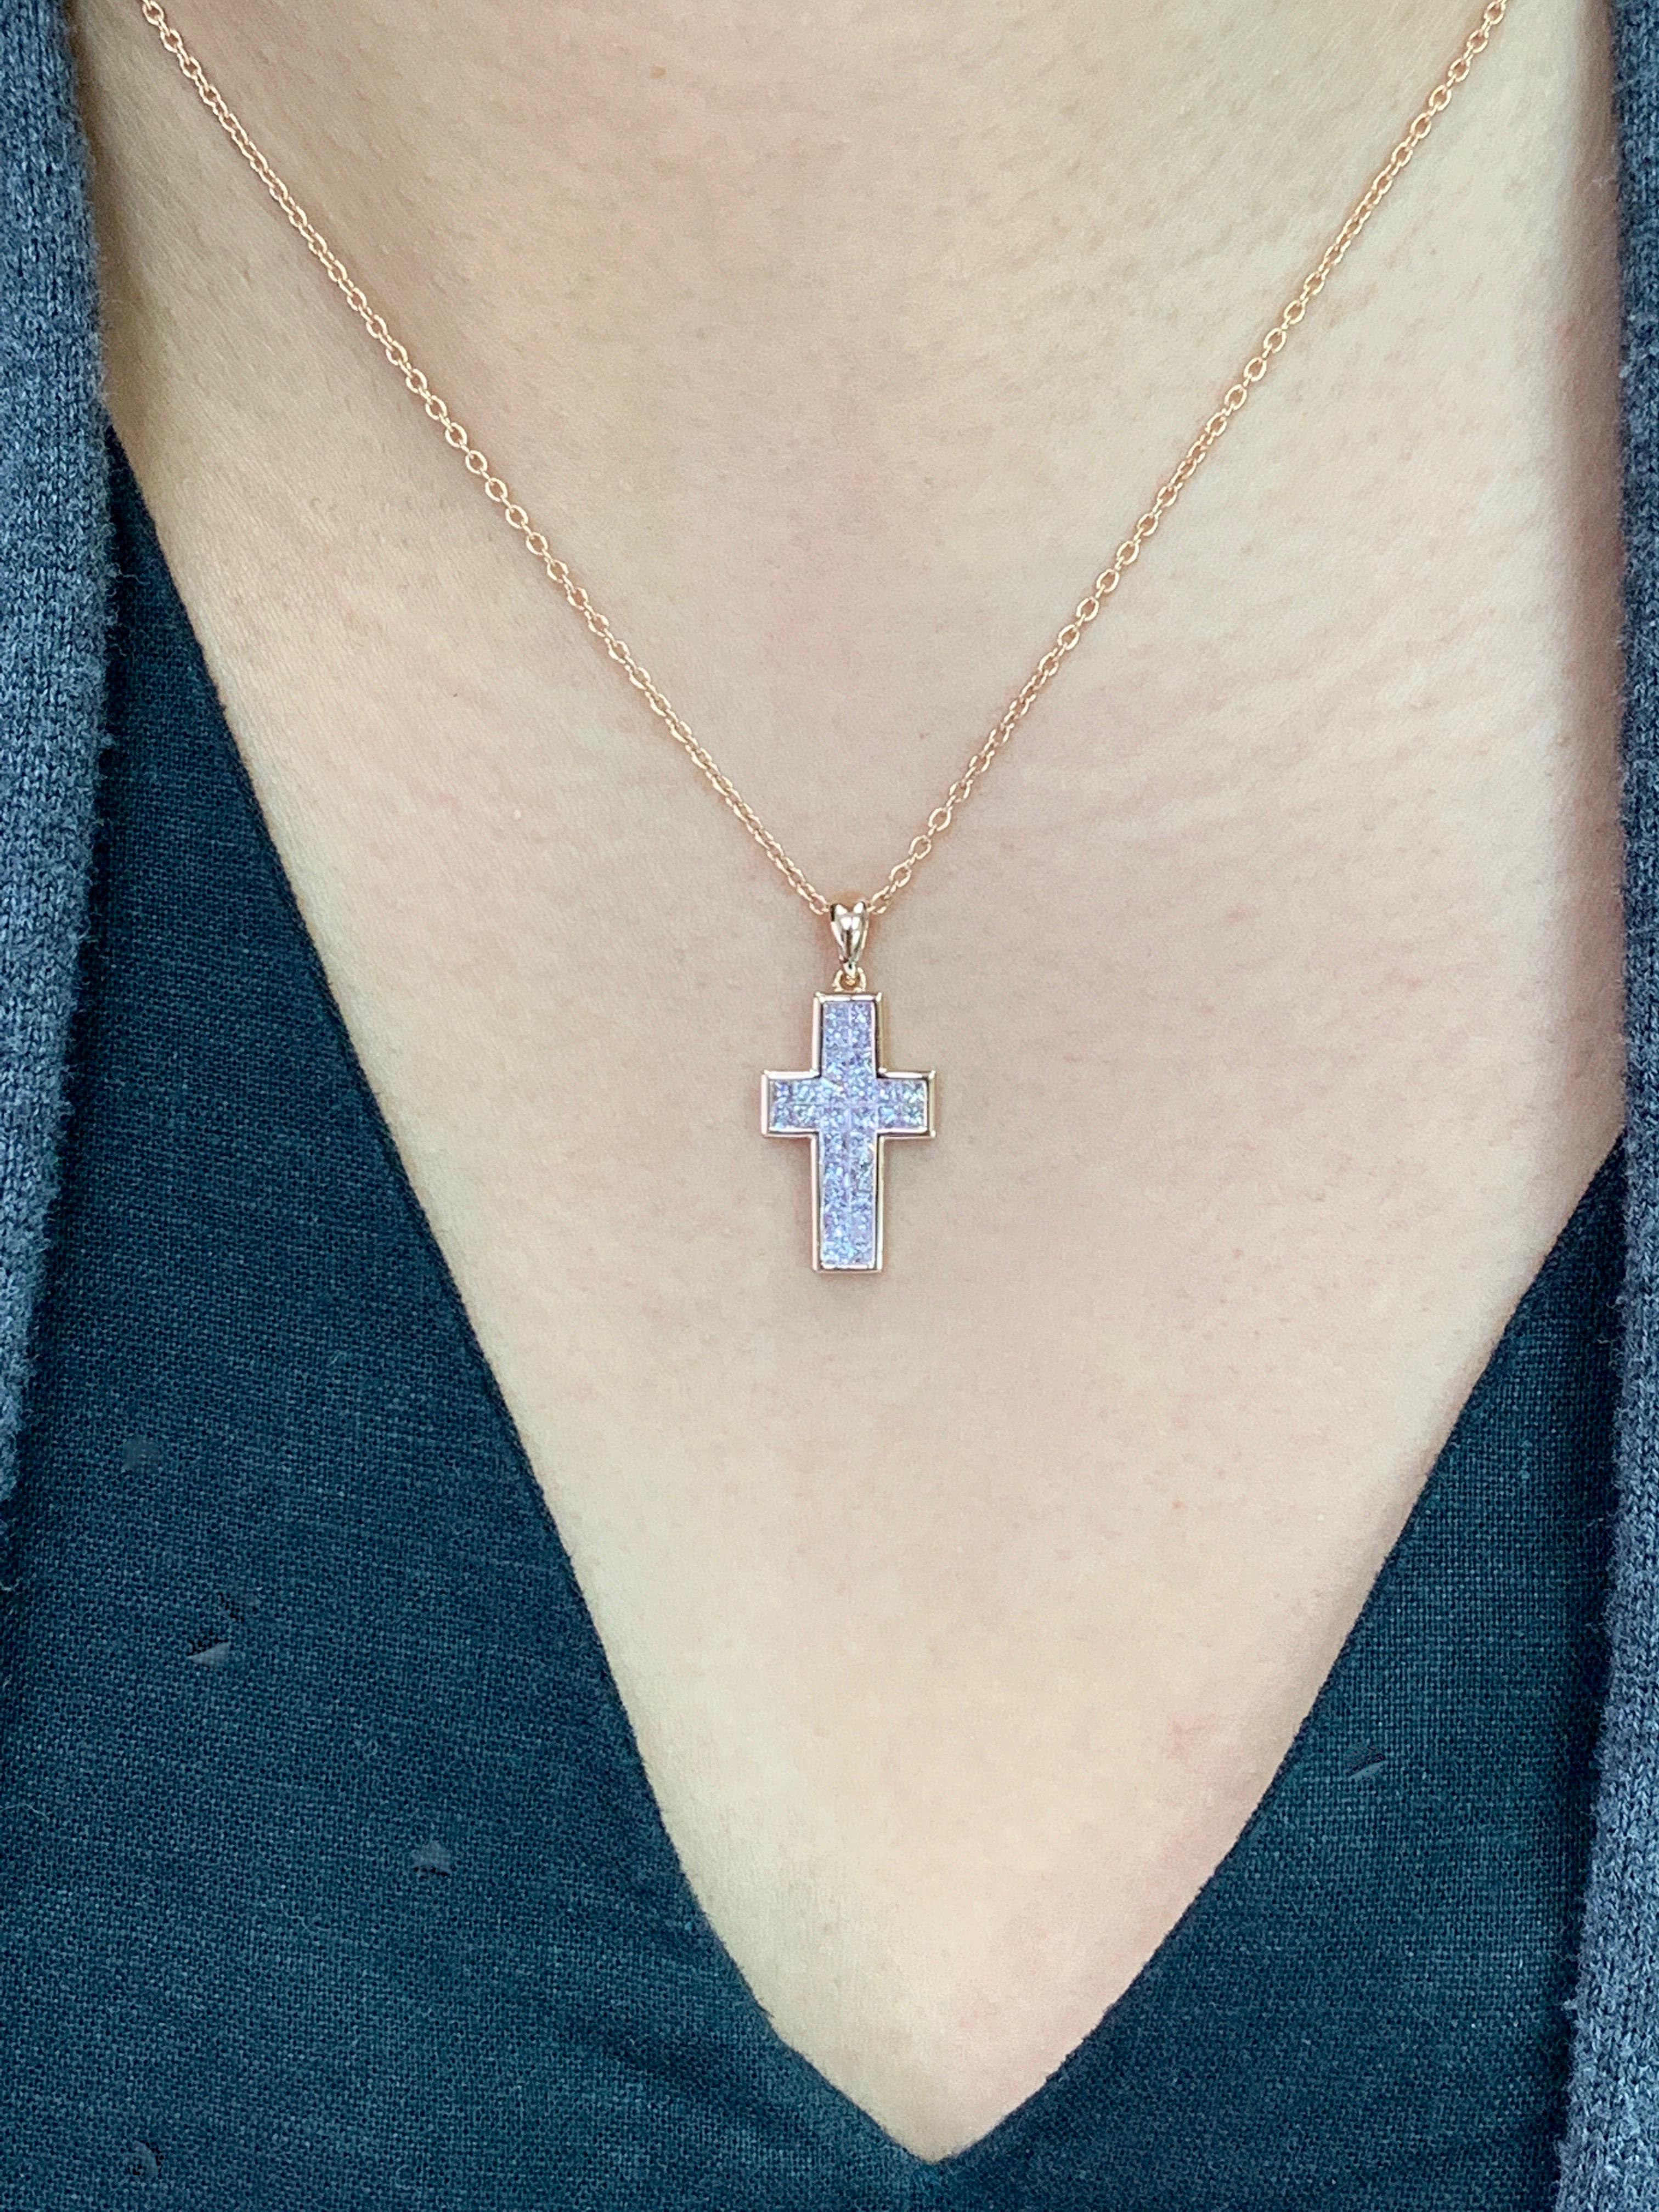 Please check out the HD video! Here is an exquisite natural baby pink diamond cross. It was not easy to put this together. Not only did we have to match the color of each diamond, we also had to match the size and cut of each stone to make the